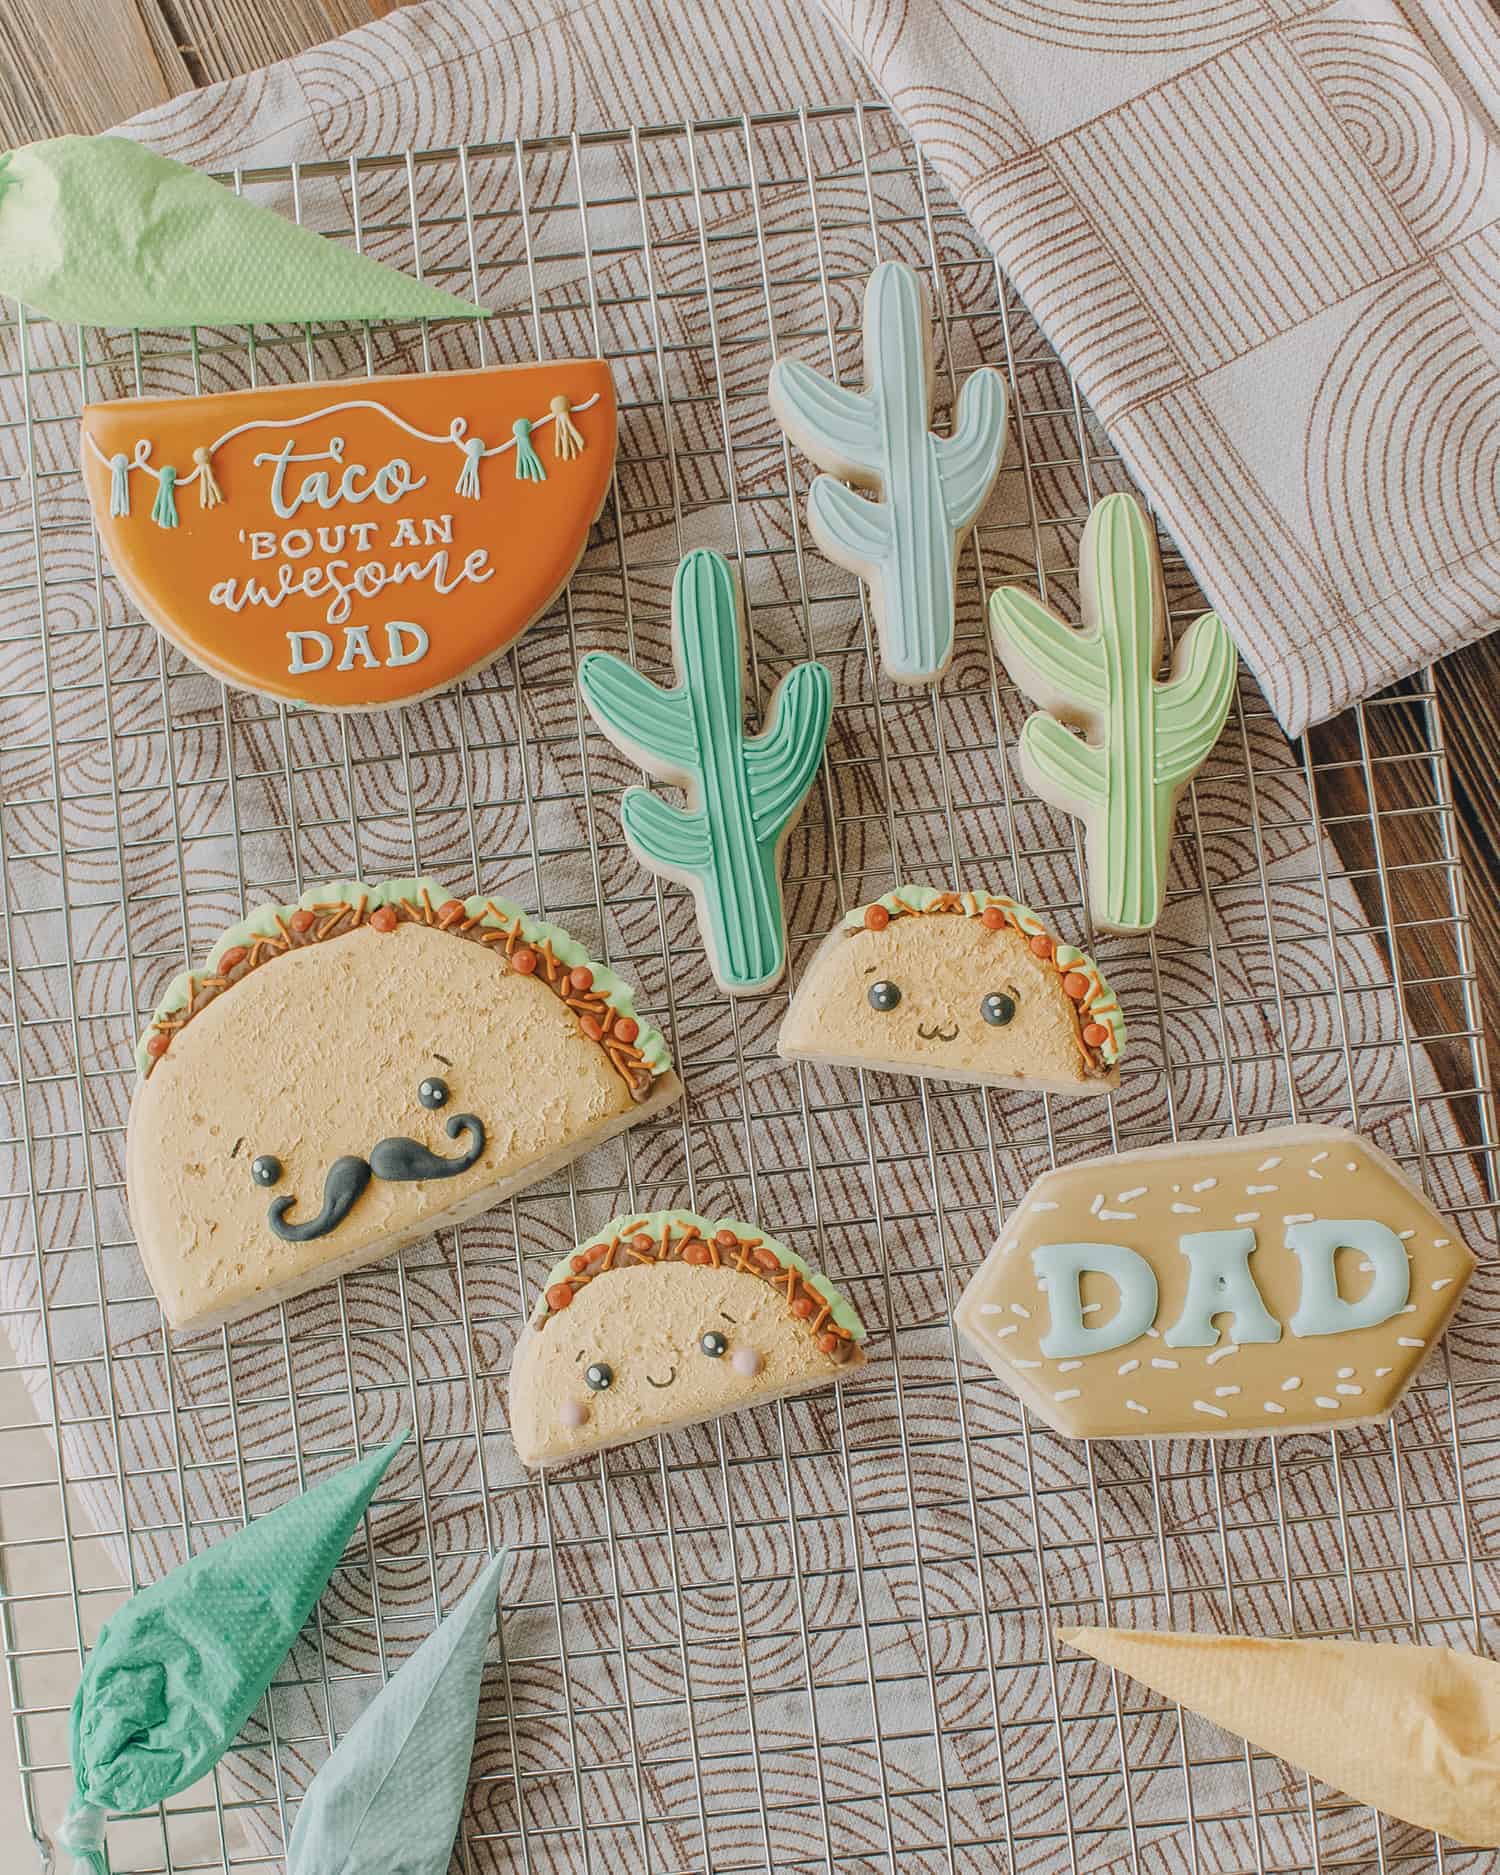 Diy father's day gifts